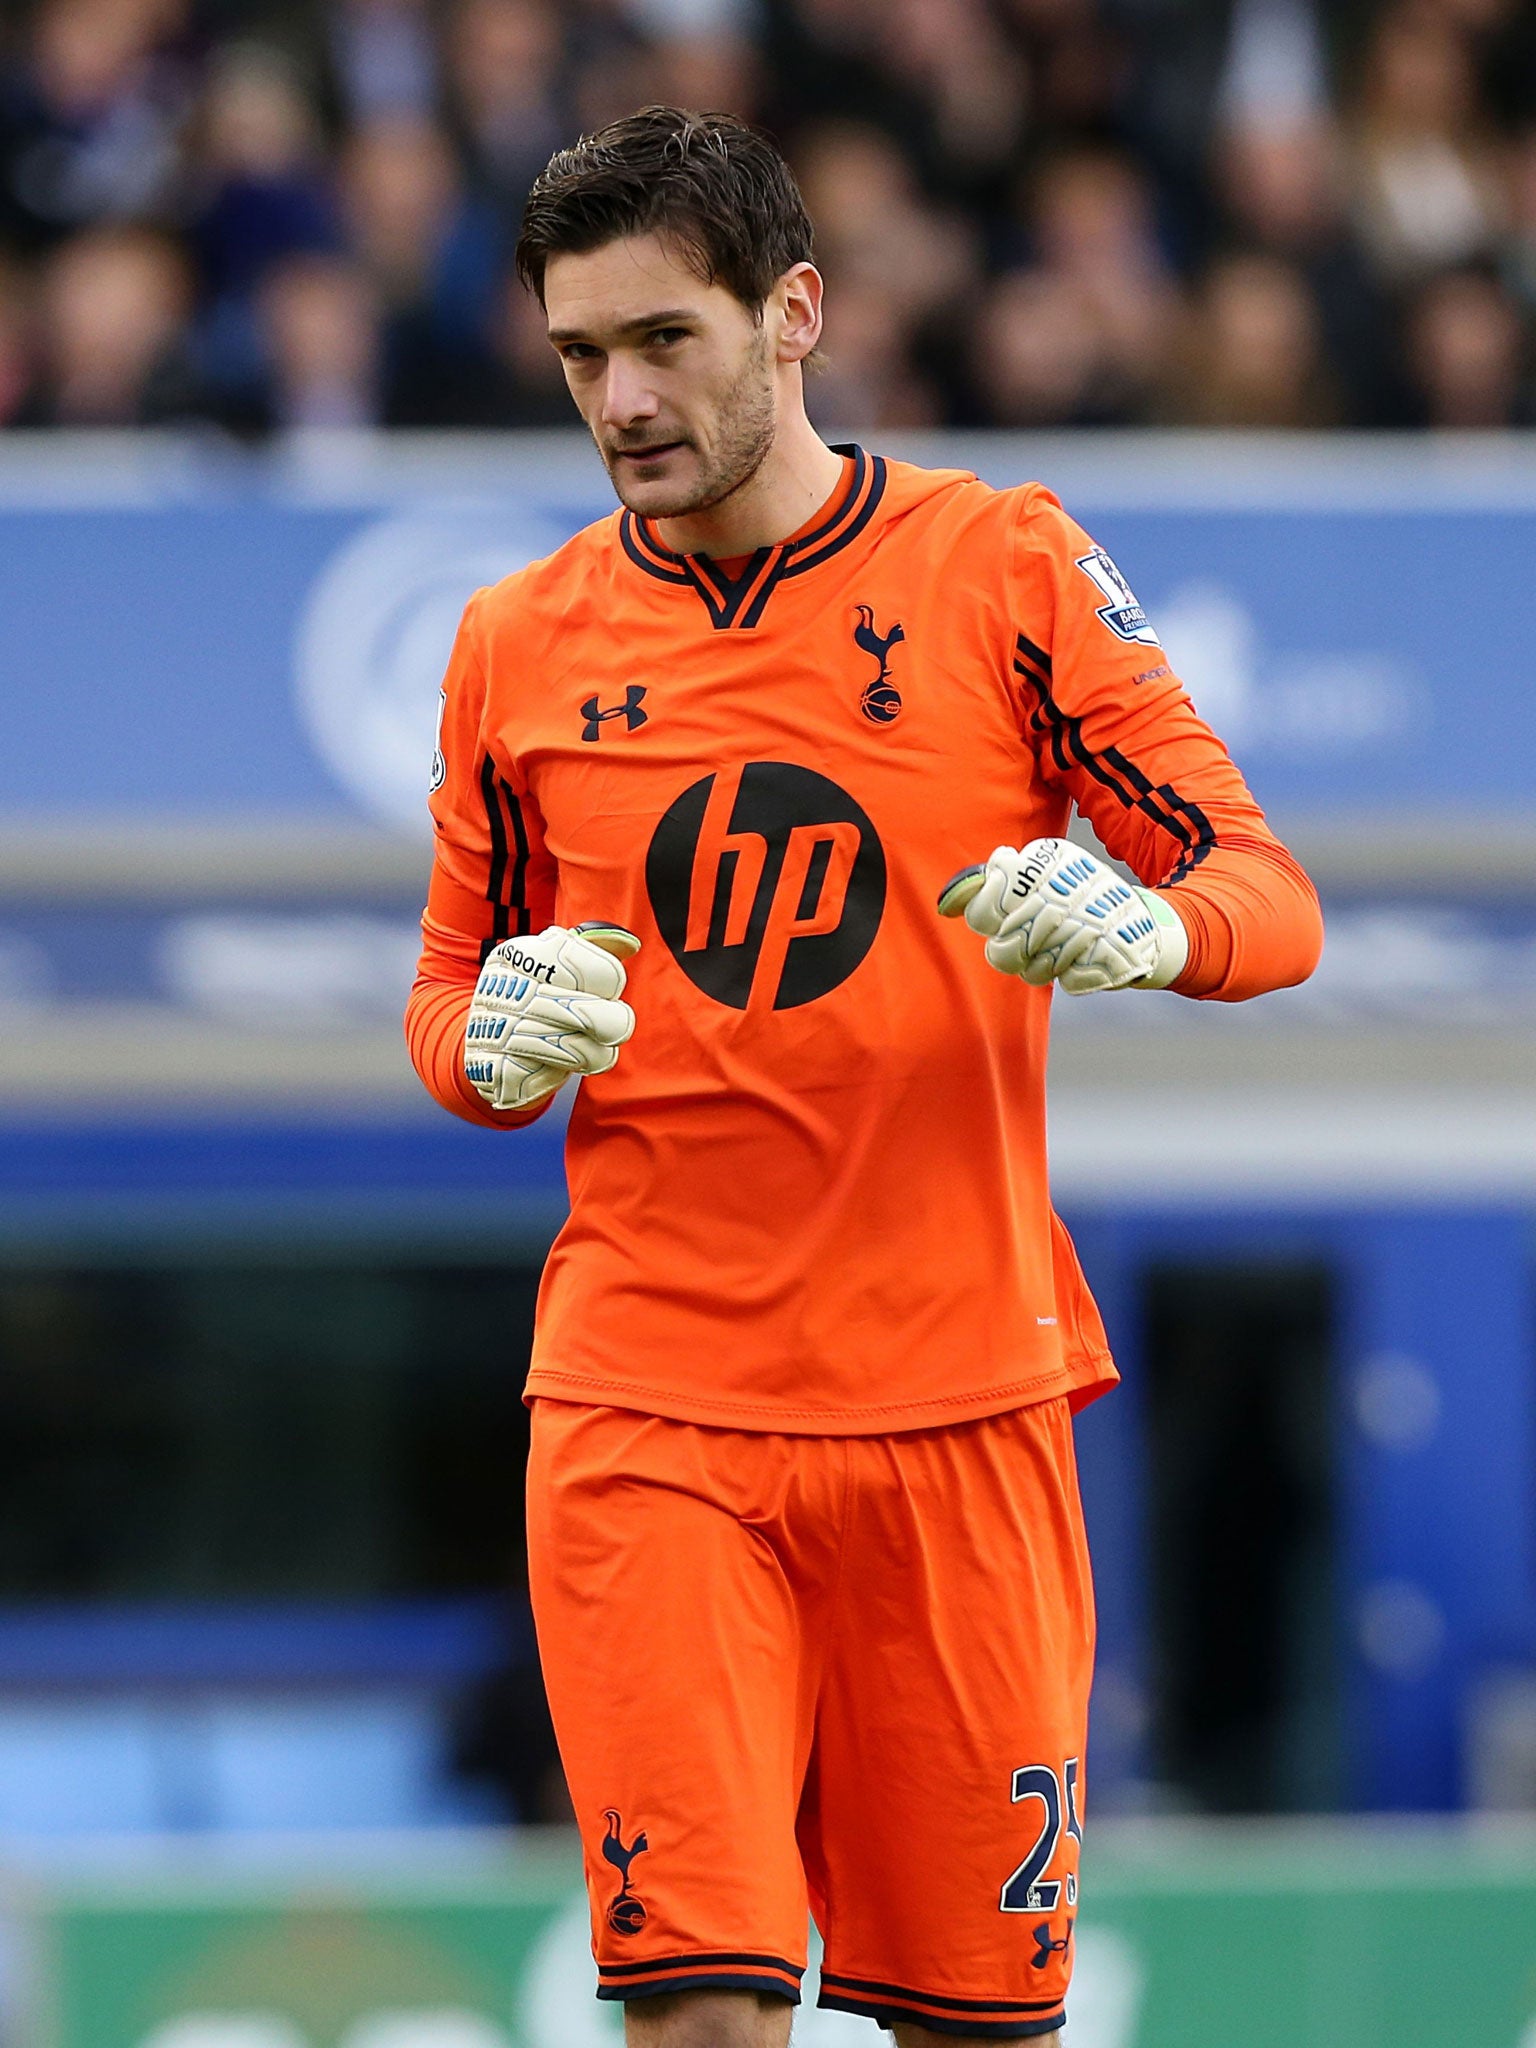 Hugo Lloris: Tottenham said their medical staff judged the goalkeeper fit to continue playing